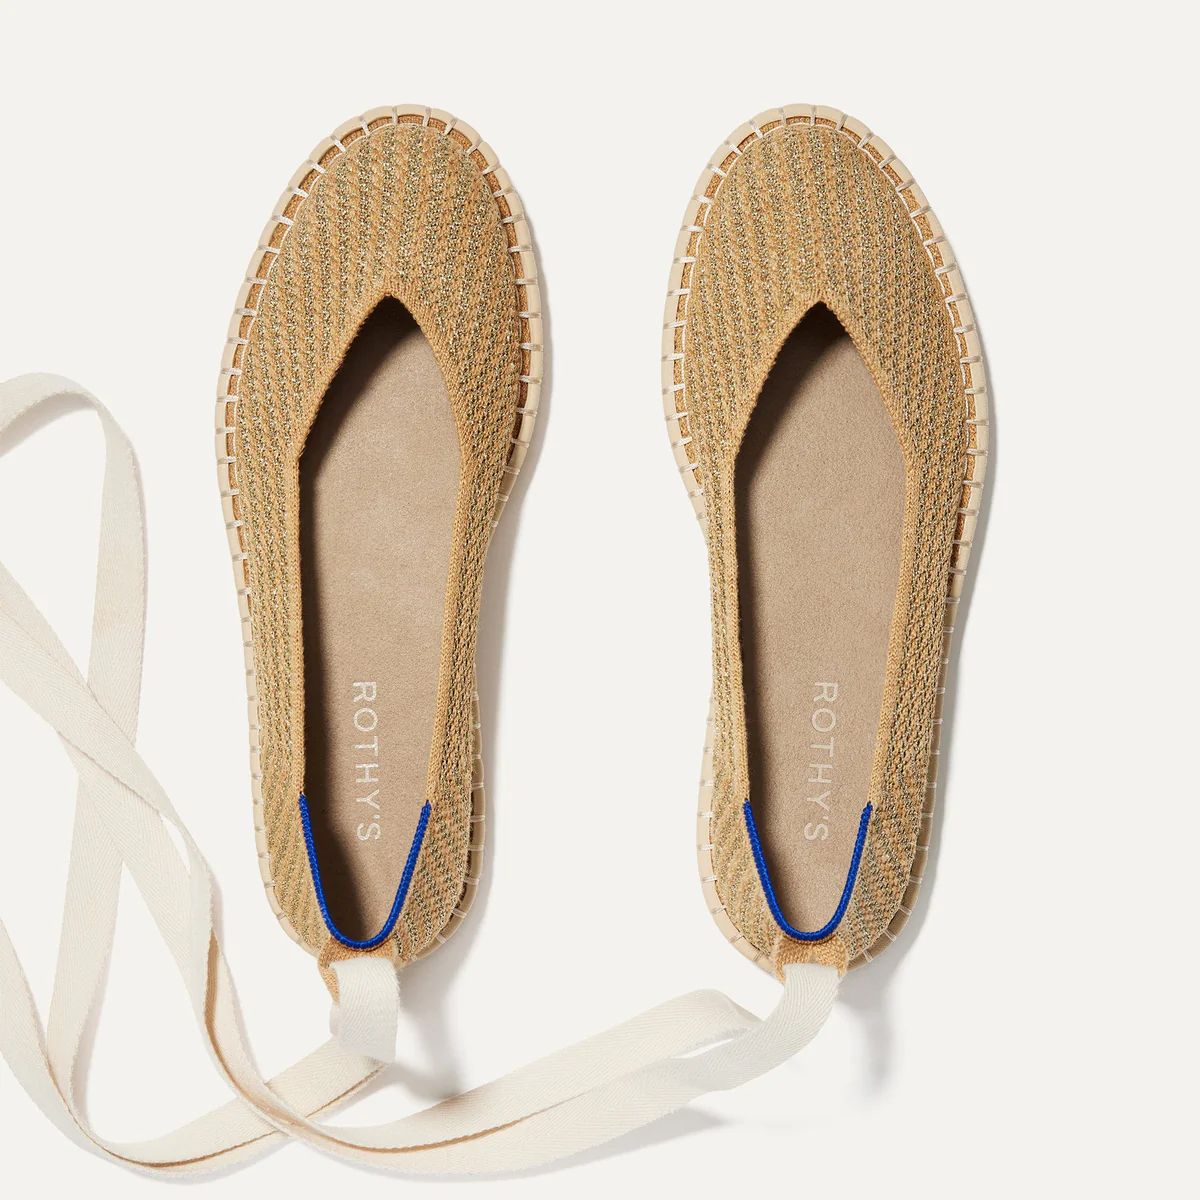 The Espadrille | Rothy's